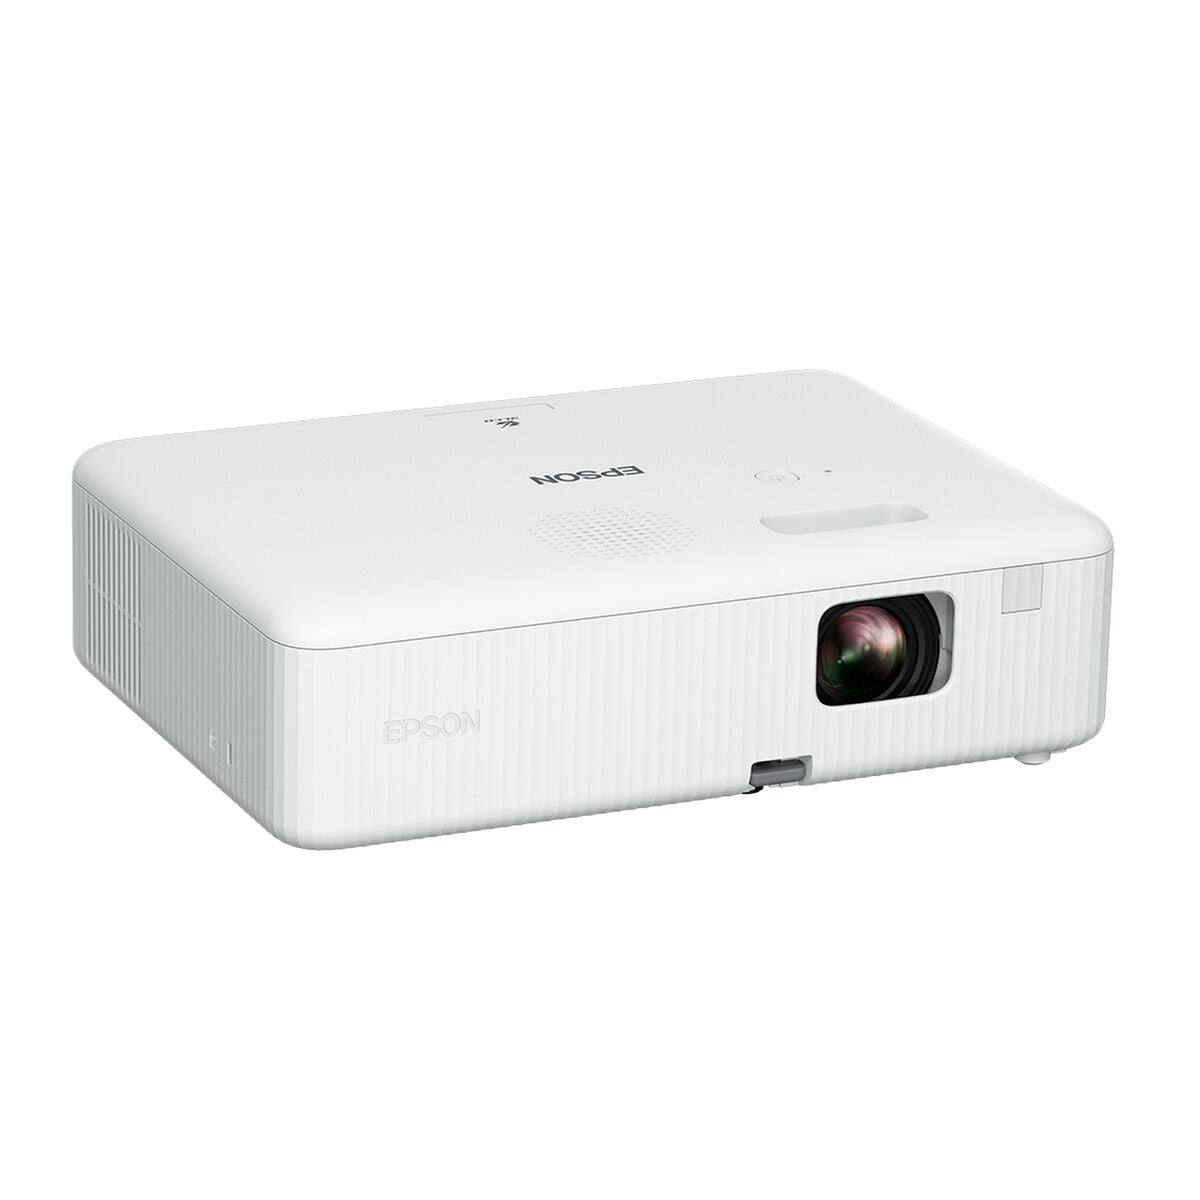 Projector Epson CO-W01 3000 lm, Epson, Electronics, TV, Video and home cinema, projector-epson-co-w01-3000-lm, Brand_Epson, category-reference-2609, category-reference-2642, category-reference-2947, category-reference-t-18805, category-reference-t-19653, cinema and television, computers / peripherals, Condition_NEW, entertainment, office, Price_500 - 600, RiotNook